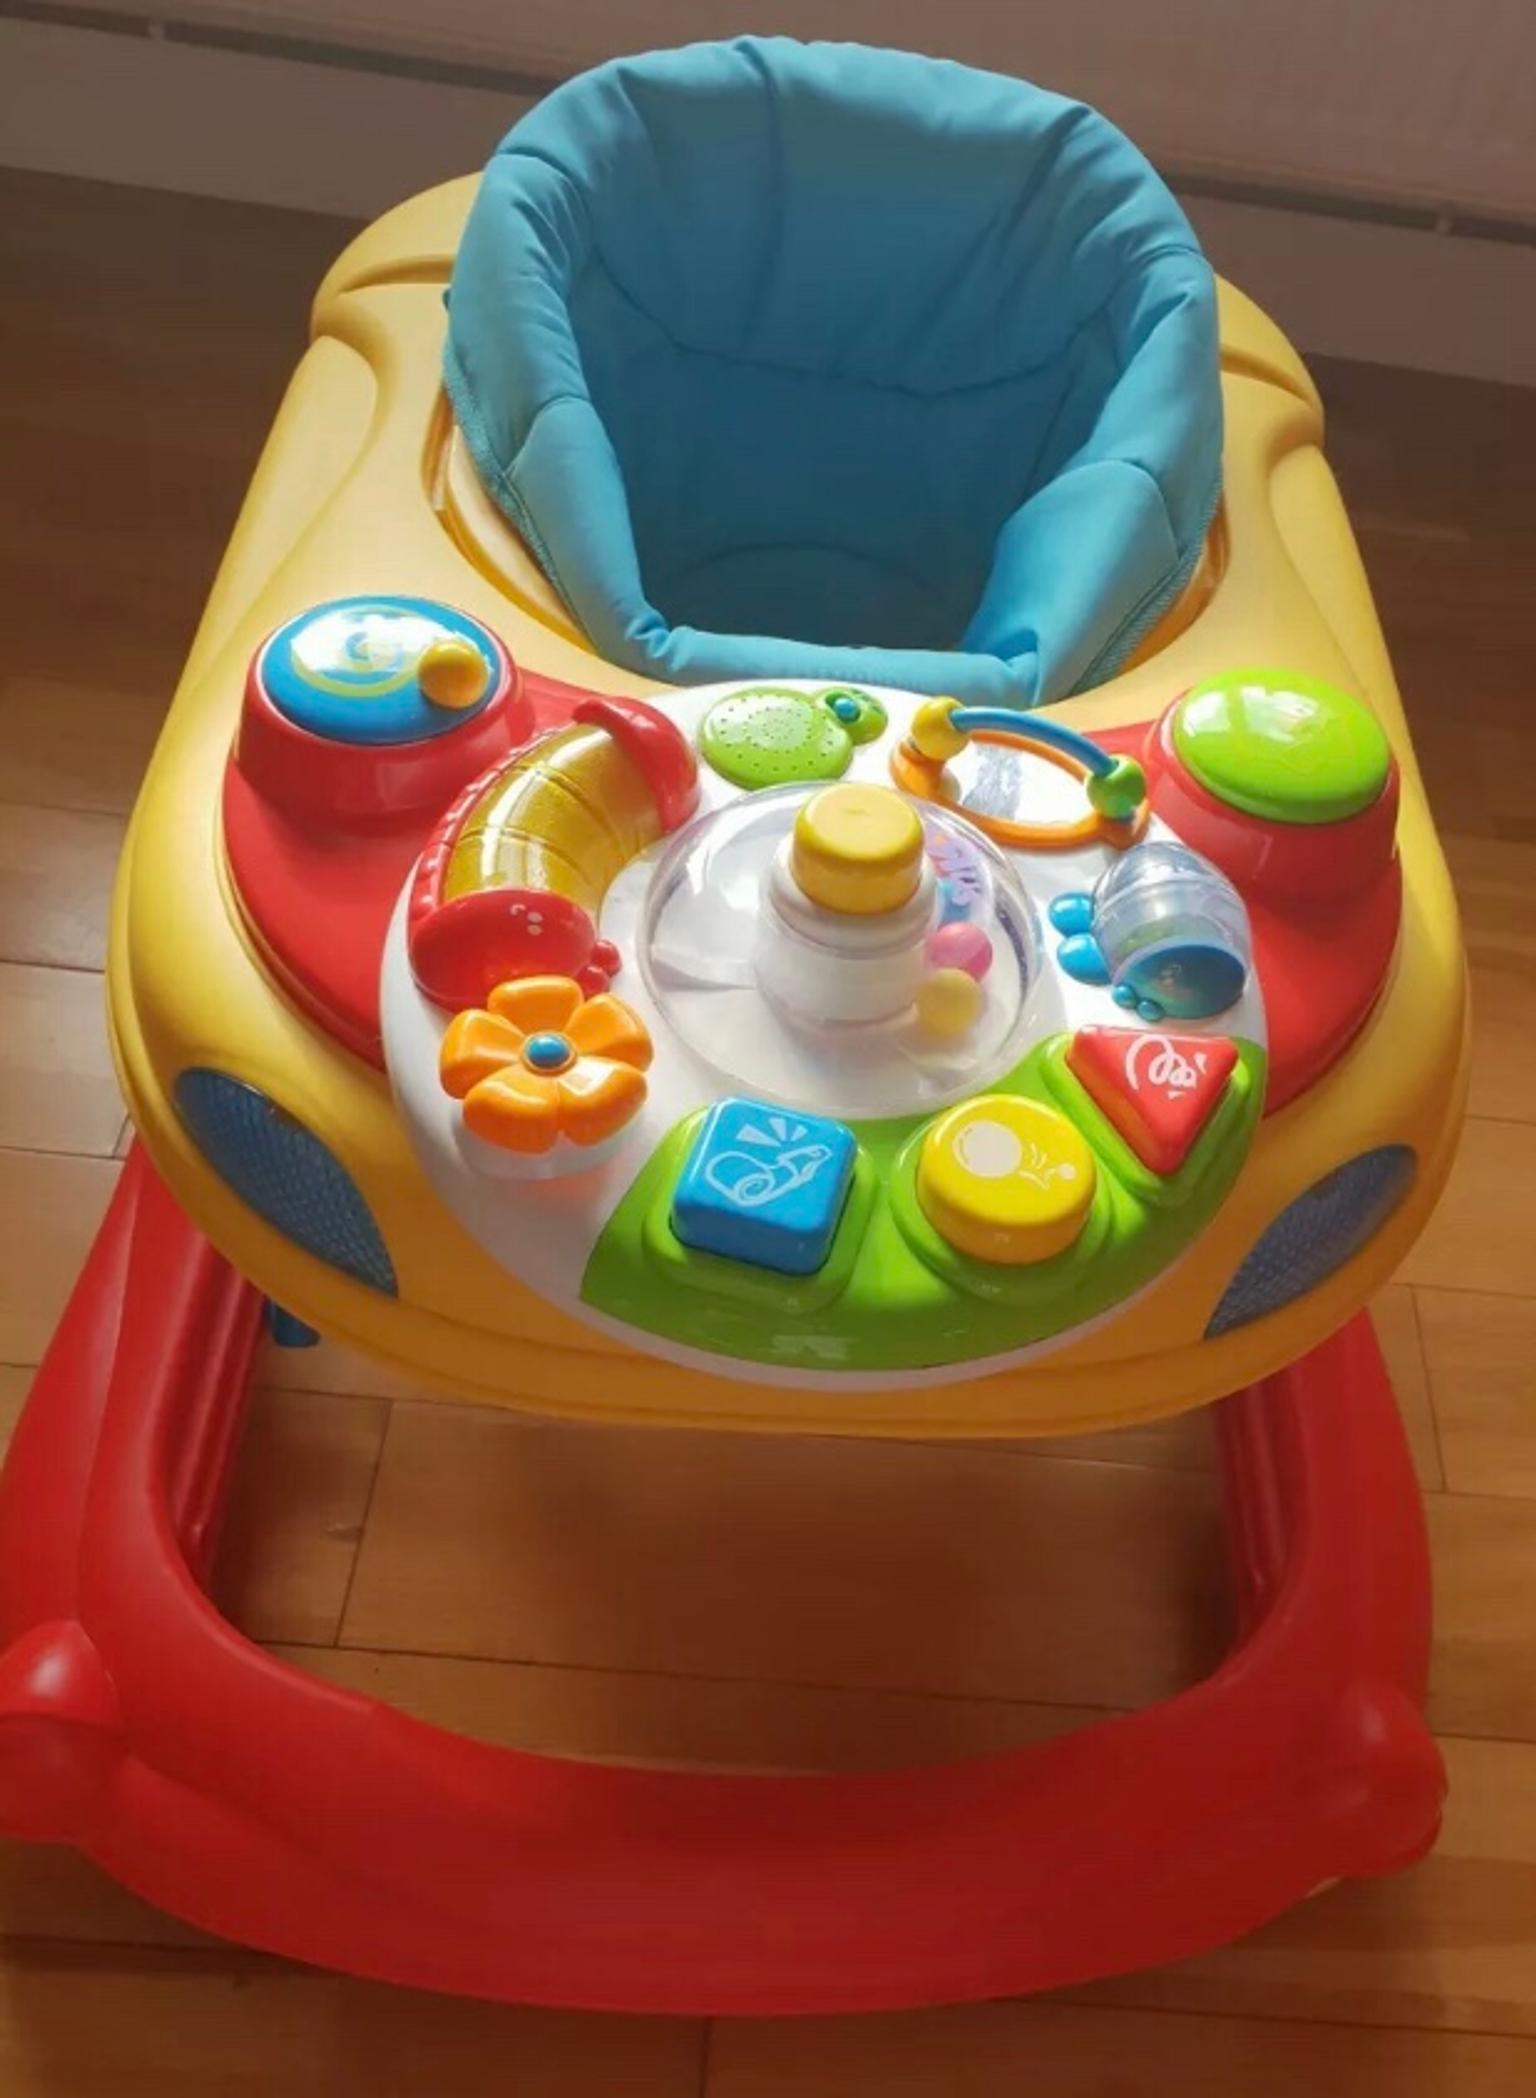 baby walker toys are us